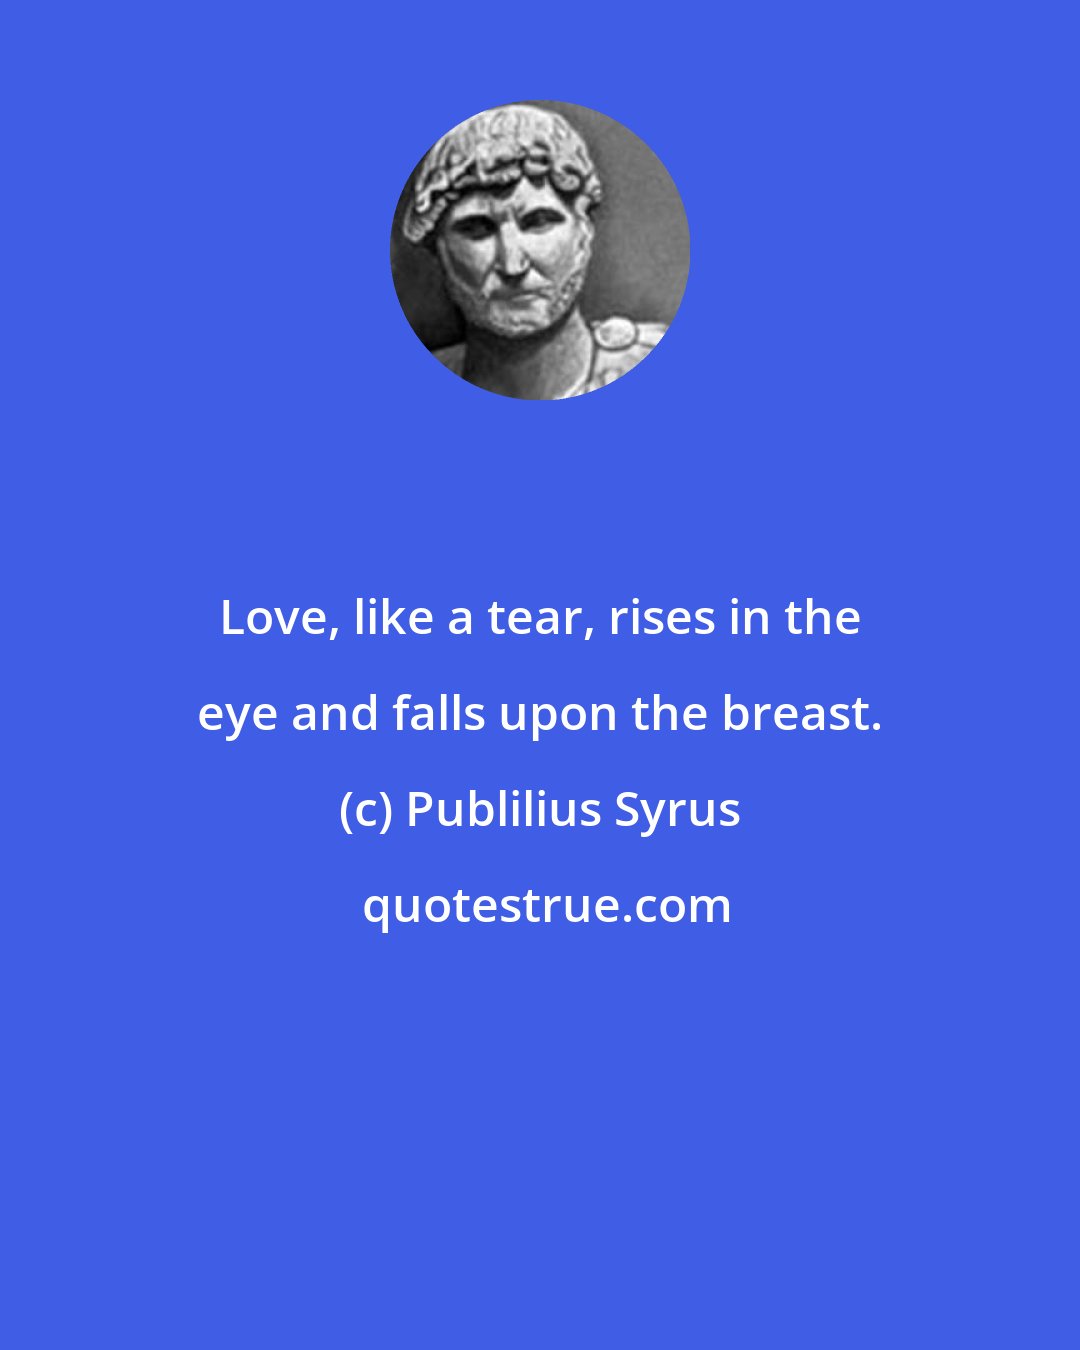 Publilius Syrus: Love, like a tear, rises in the eye and falls upon the breast.